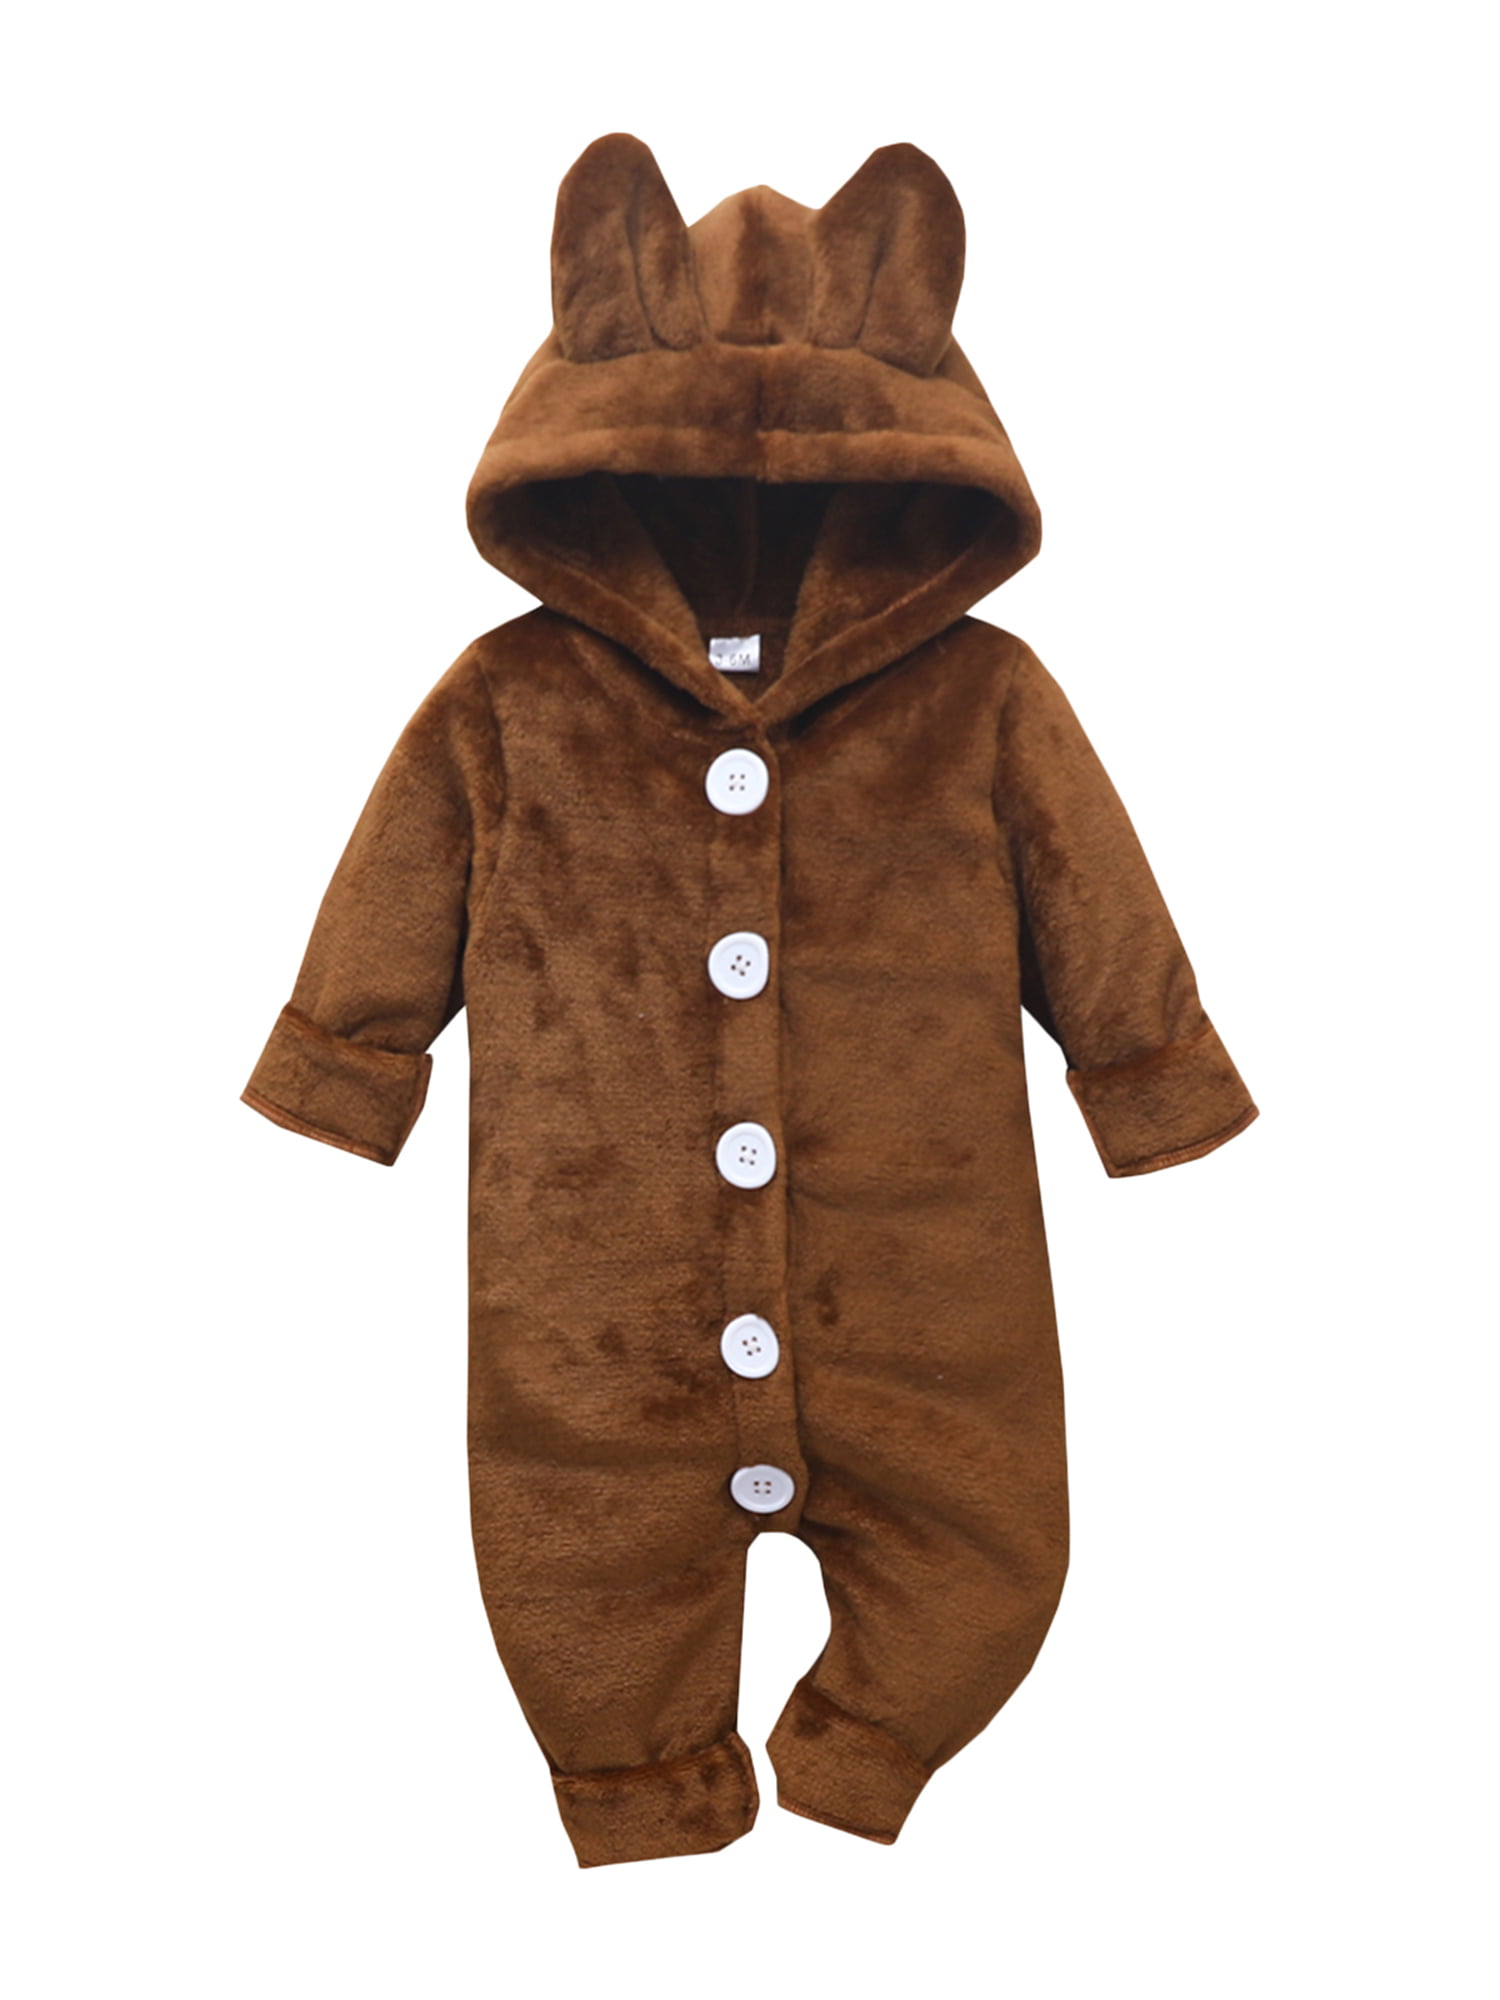 Baby Romper Hooded Outfits Fall Winter Jumpsuit Lightweight Outerwear Long Sleeve Warm Snowsuit Onesies Overall for Boys Girls 6-9 Months Brown 